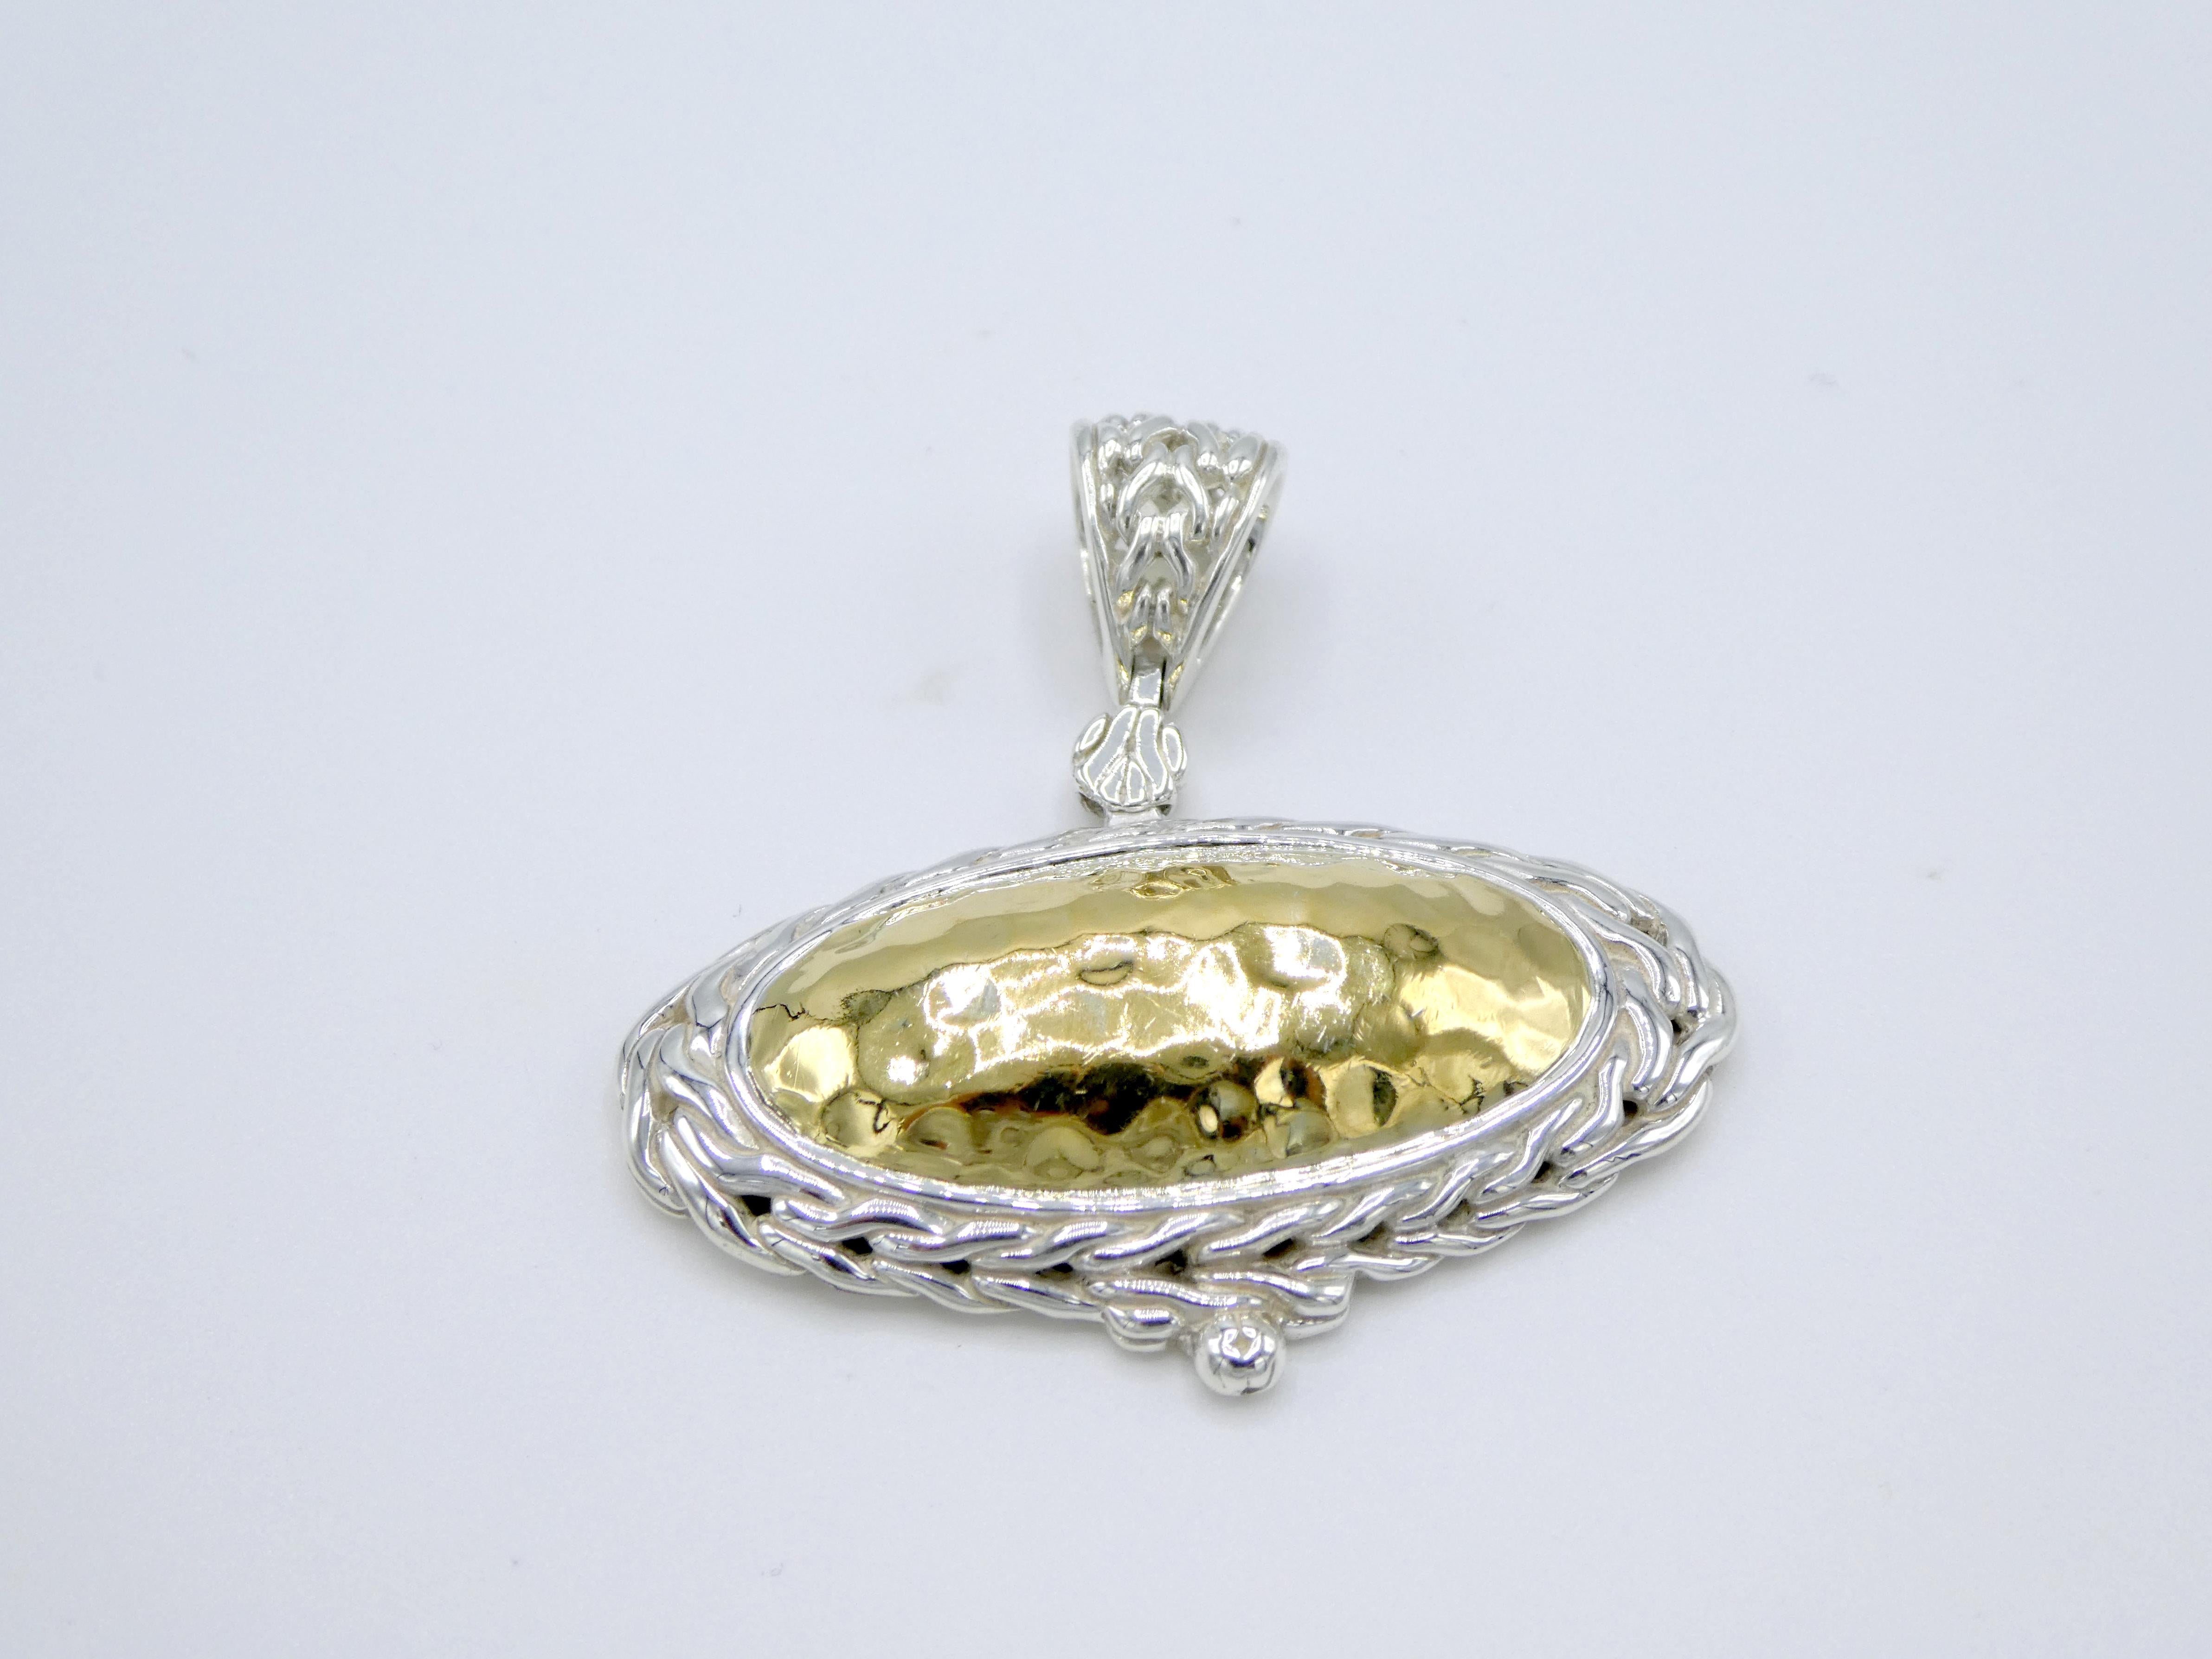 John Hardy Palu Oval Sterling Silver & 22K Gold Hammered Pendant

Metal: Sterling silver & 22k yellow gold
Weight: 14.1 grams
Length (including bale) Approx. 1.5 inches
Width: Approx. 1.6 inches
Signed: 22k 925 JH hallmark
Pendant only